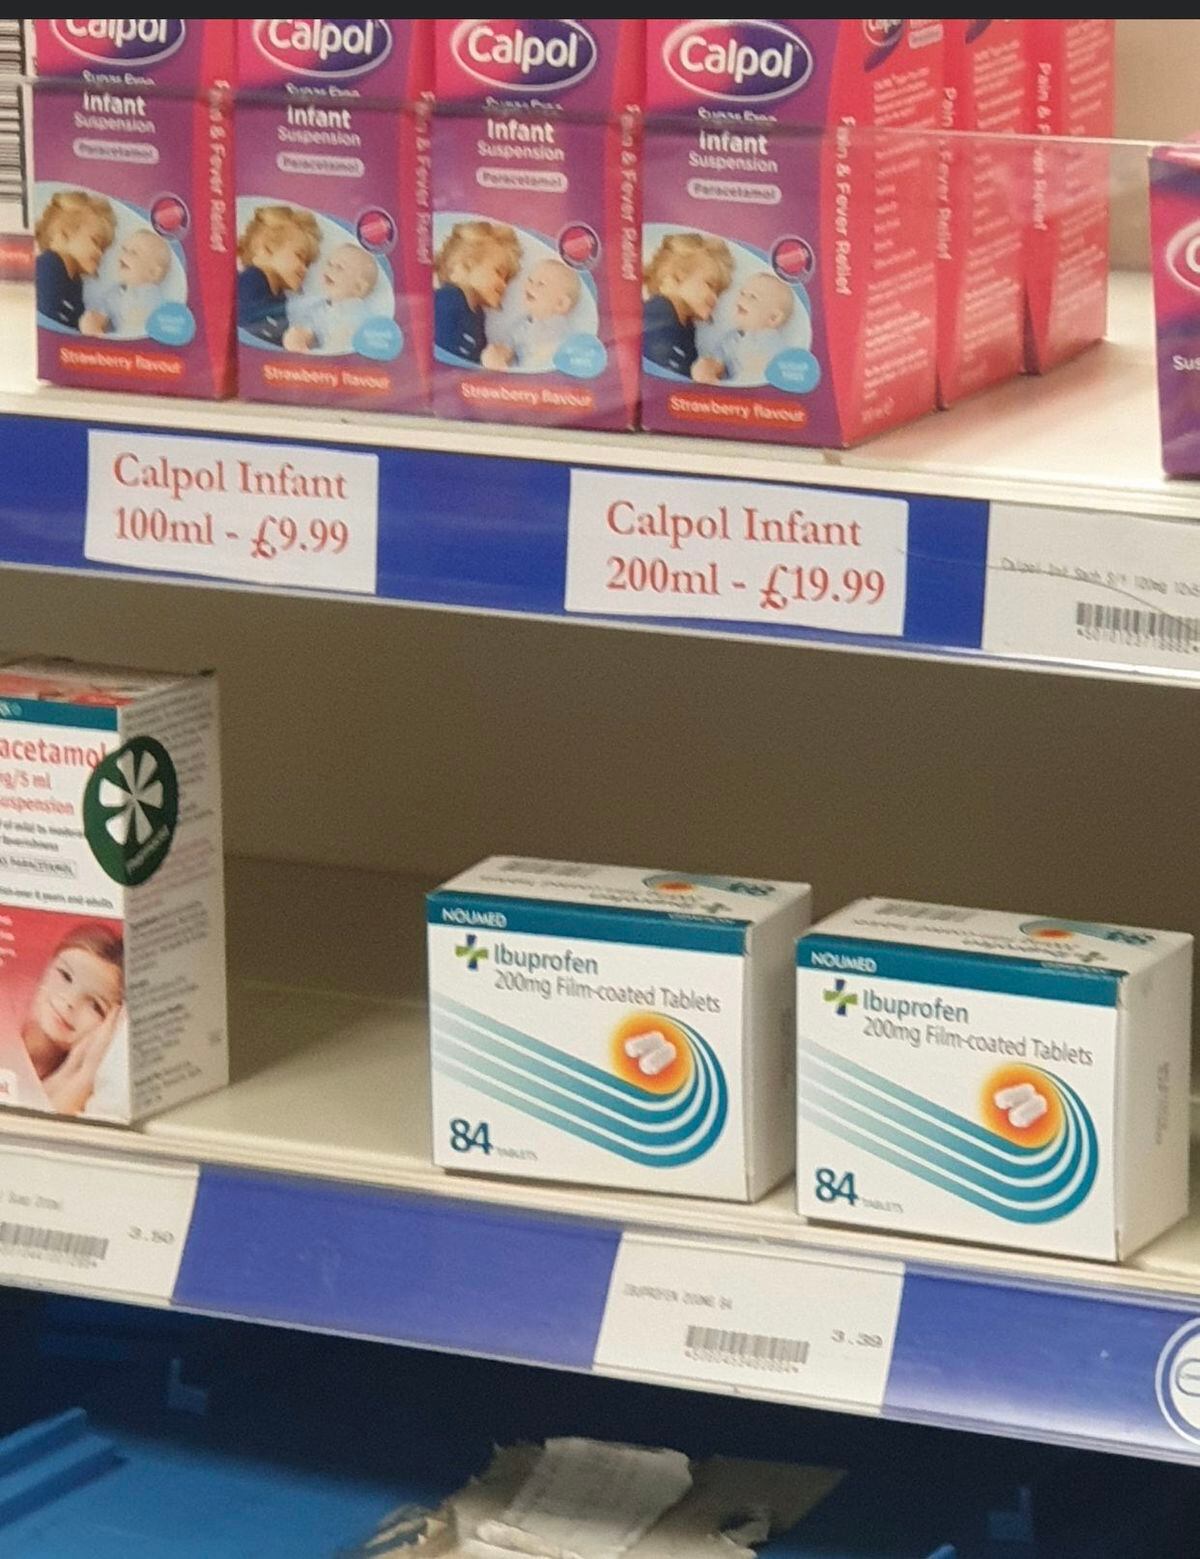 A photograph showing the ‘erroneous’ Calpol pricing at the Jhoots pharmacy in Birmingham